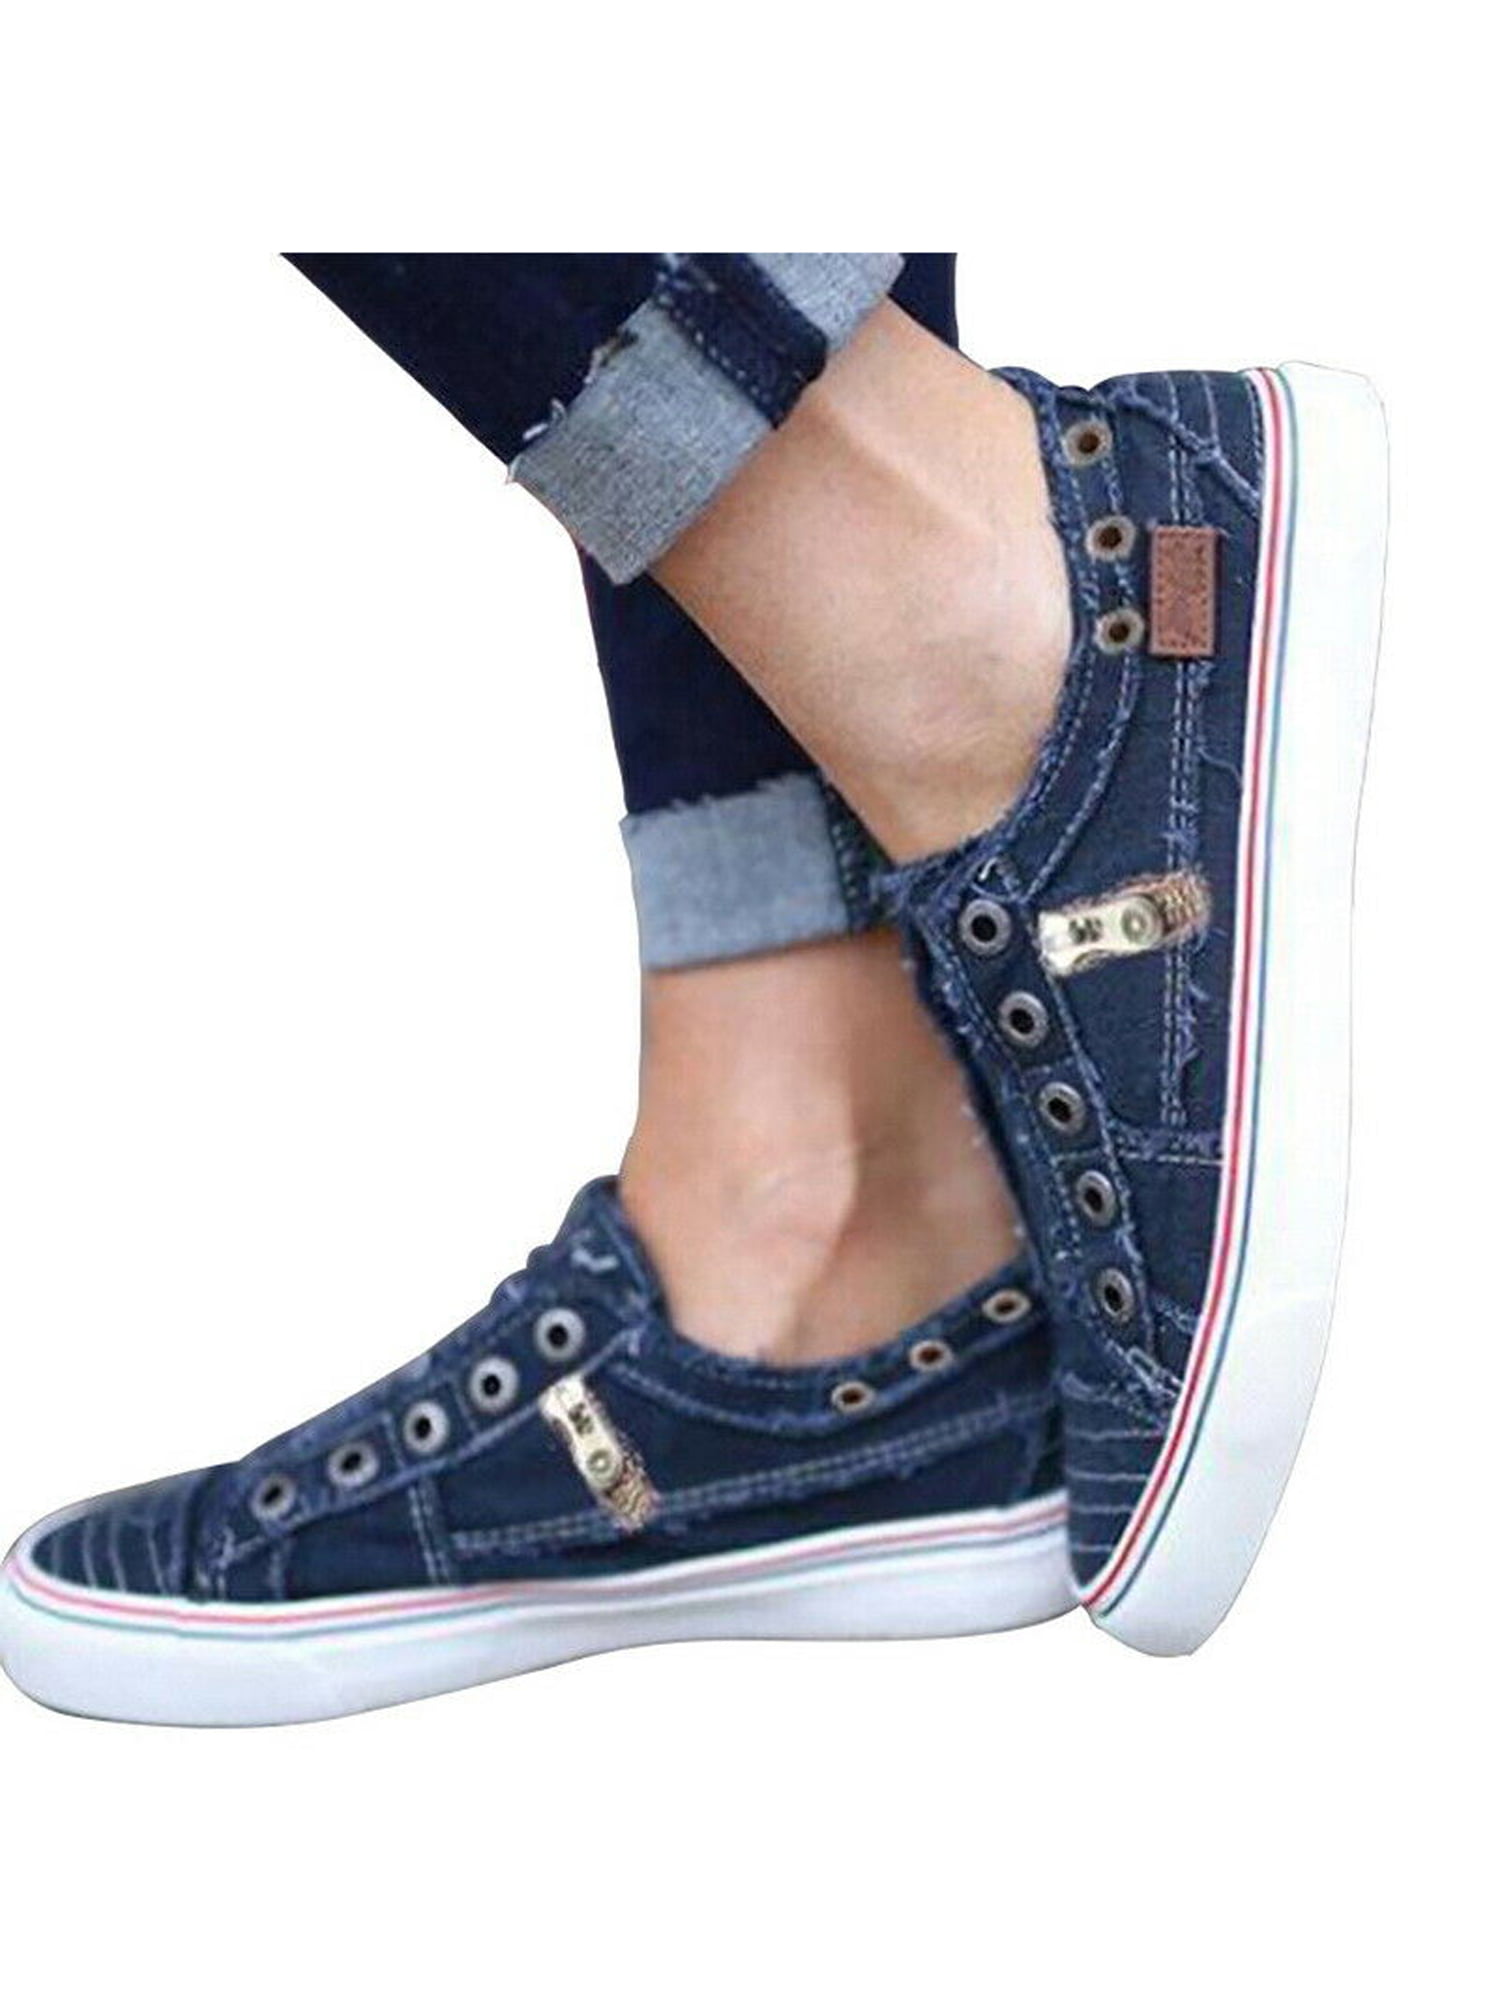 Women Flat Canvas Casual Slip On Sport Shoes Running Sneakers Round Toe Loafers